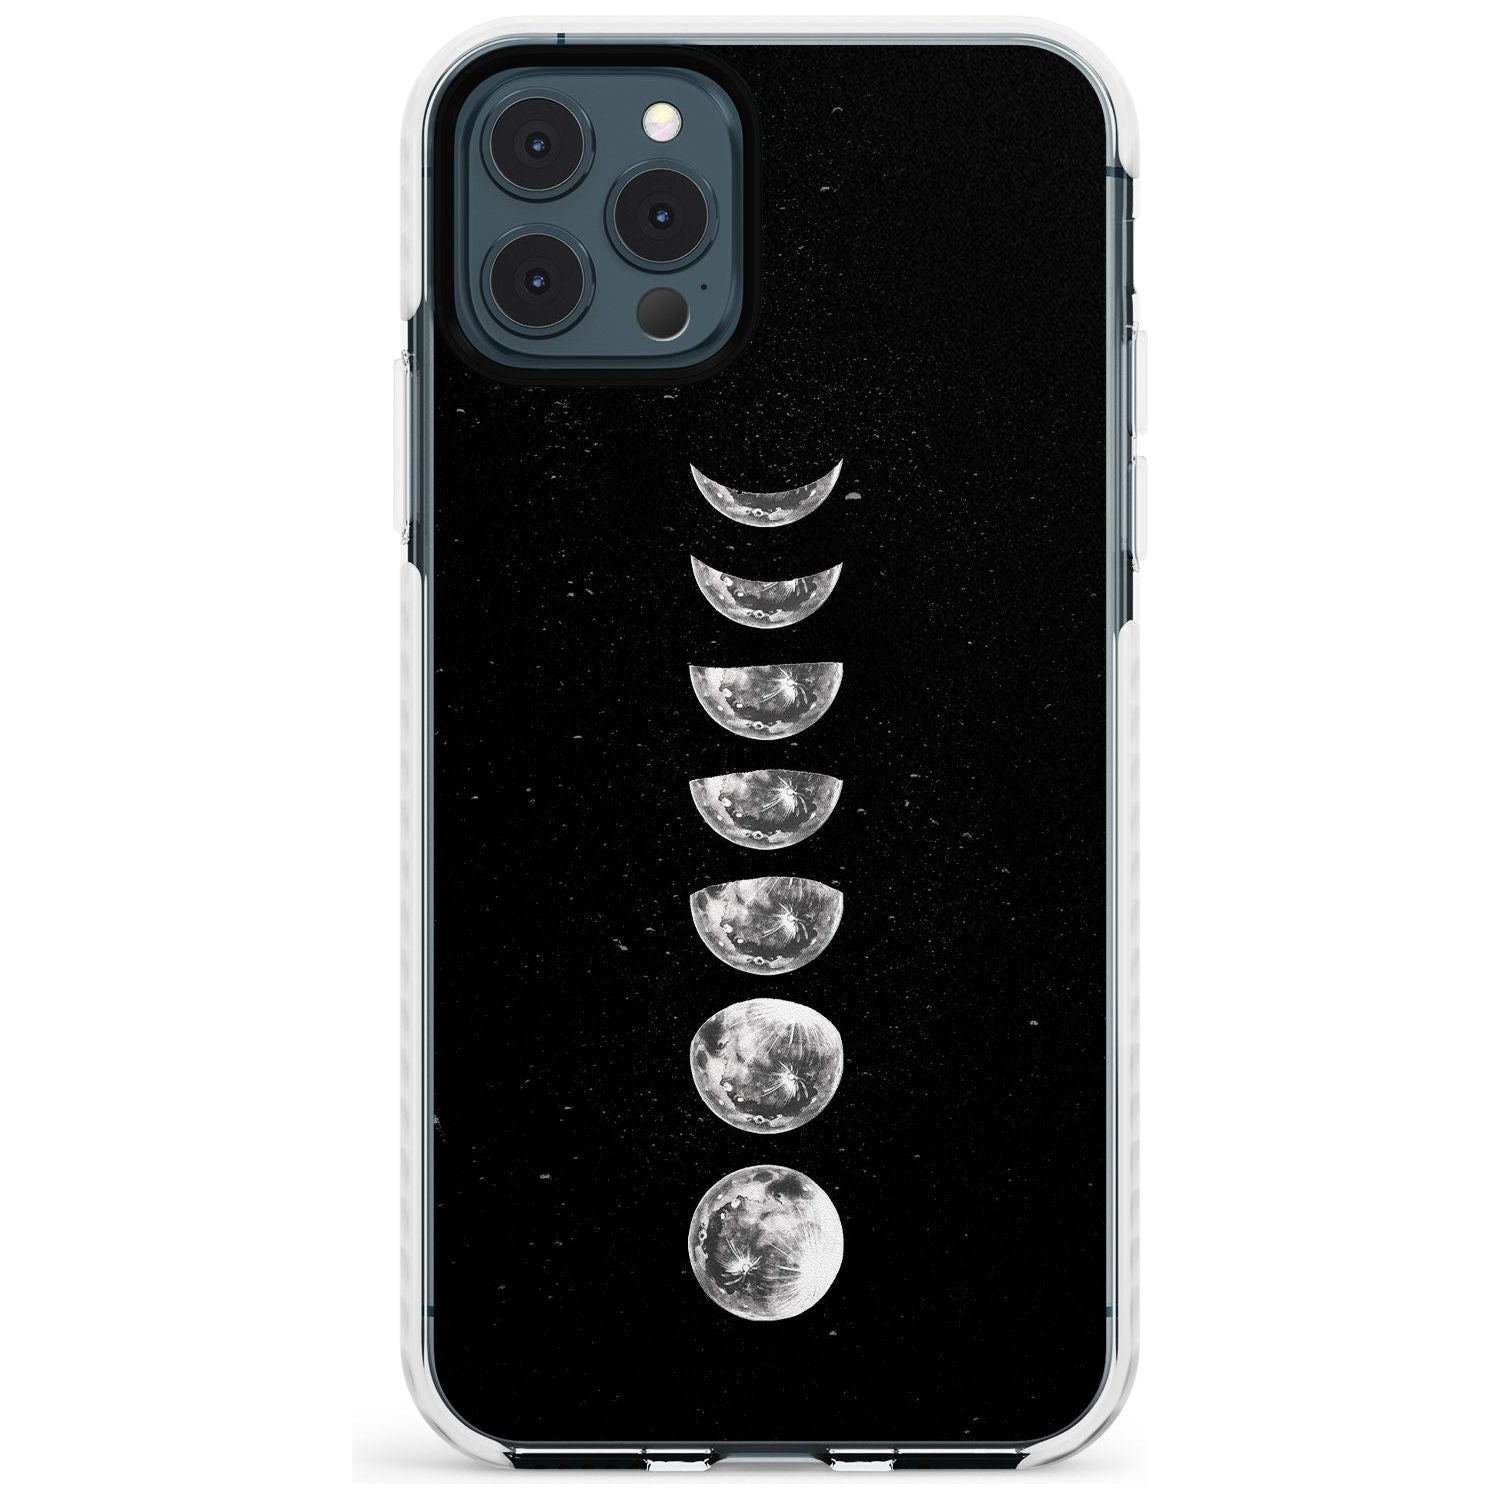 Light Watercolour Moons Slim TPU Phone Case for iPhone 11 Pro Max